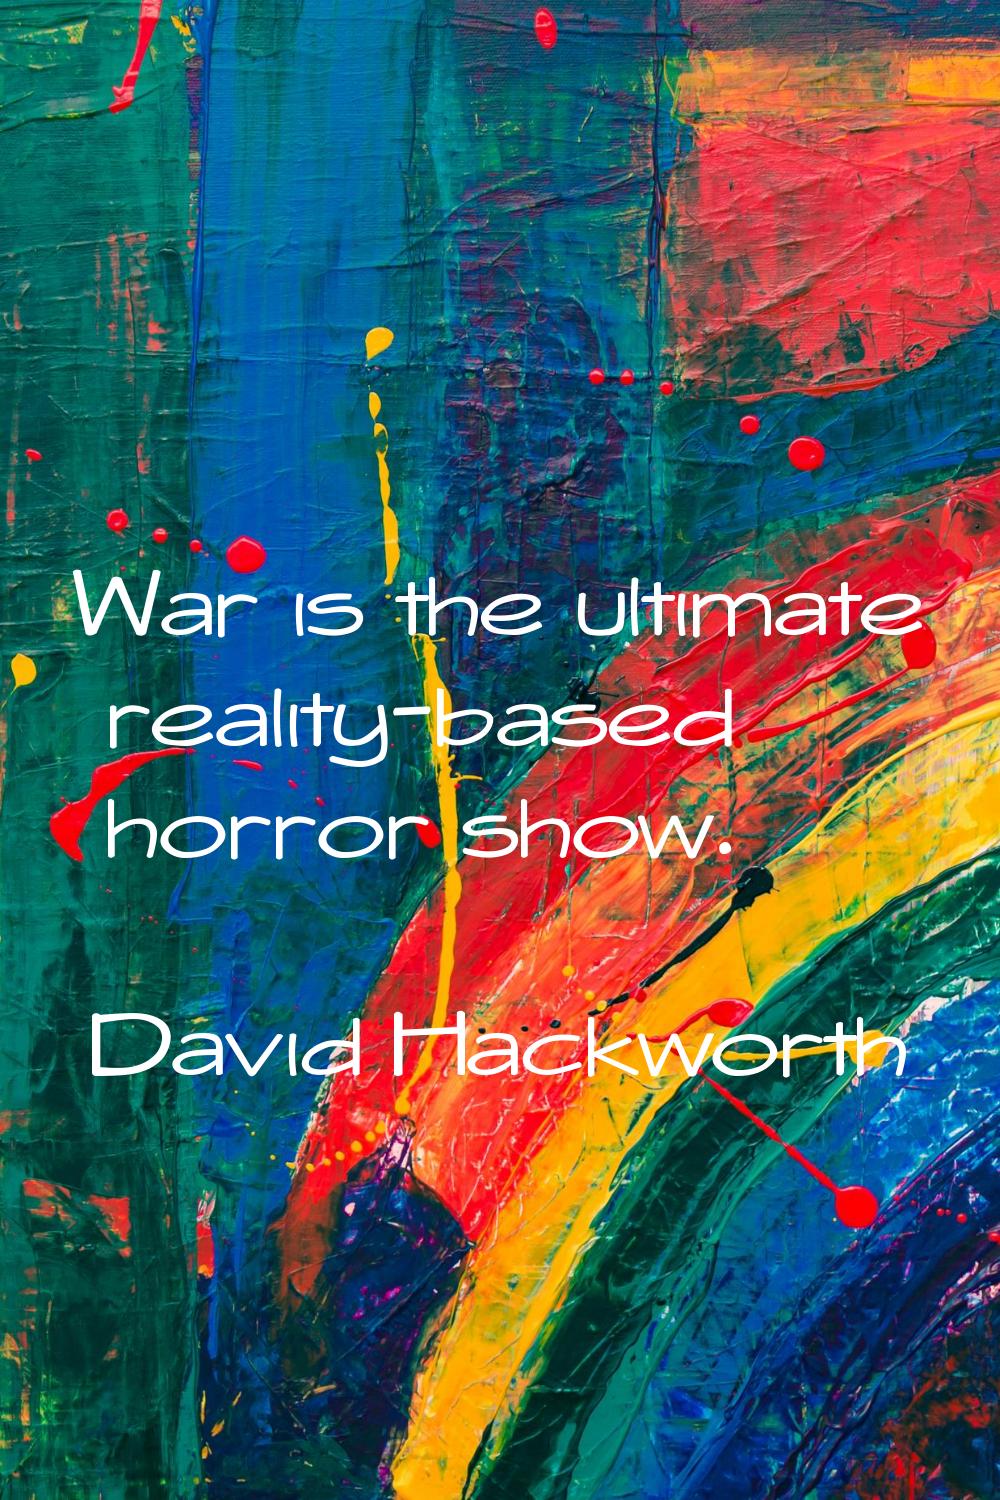 War is the ultimate reality-based horror show.